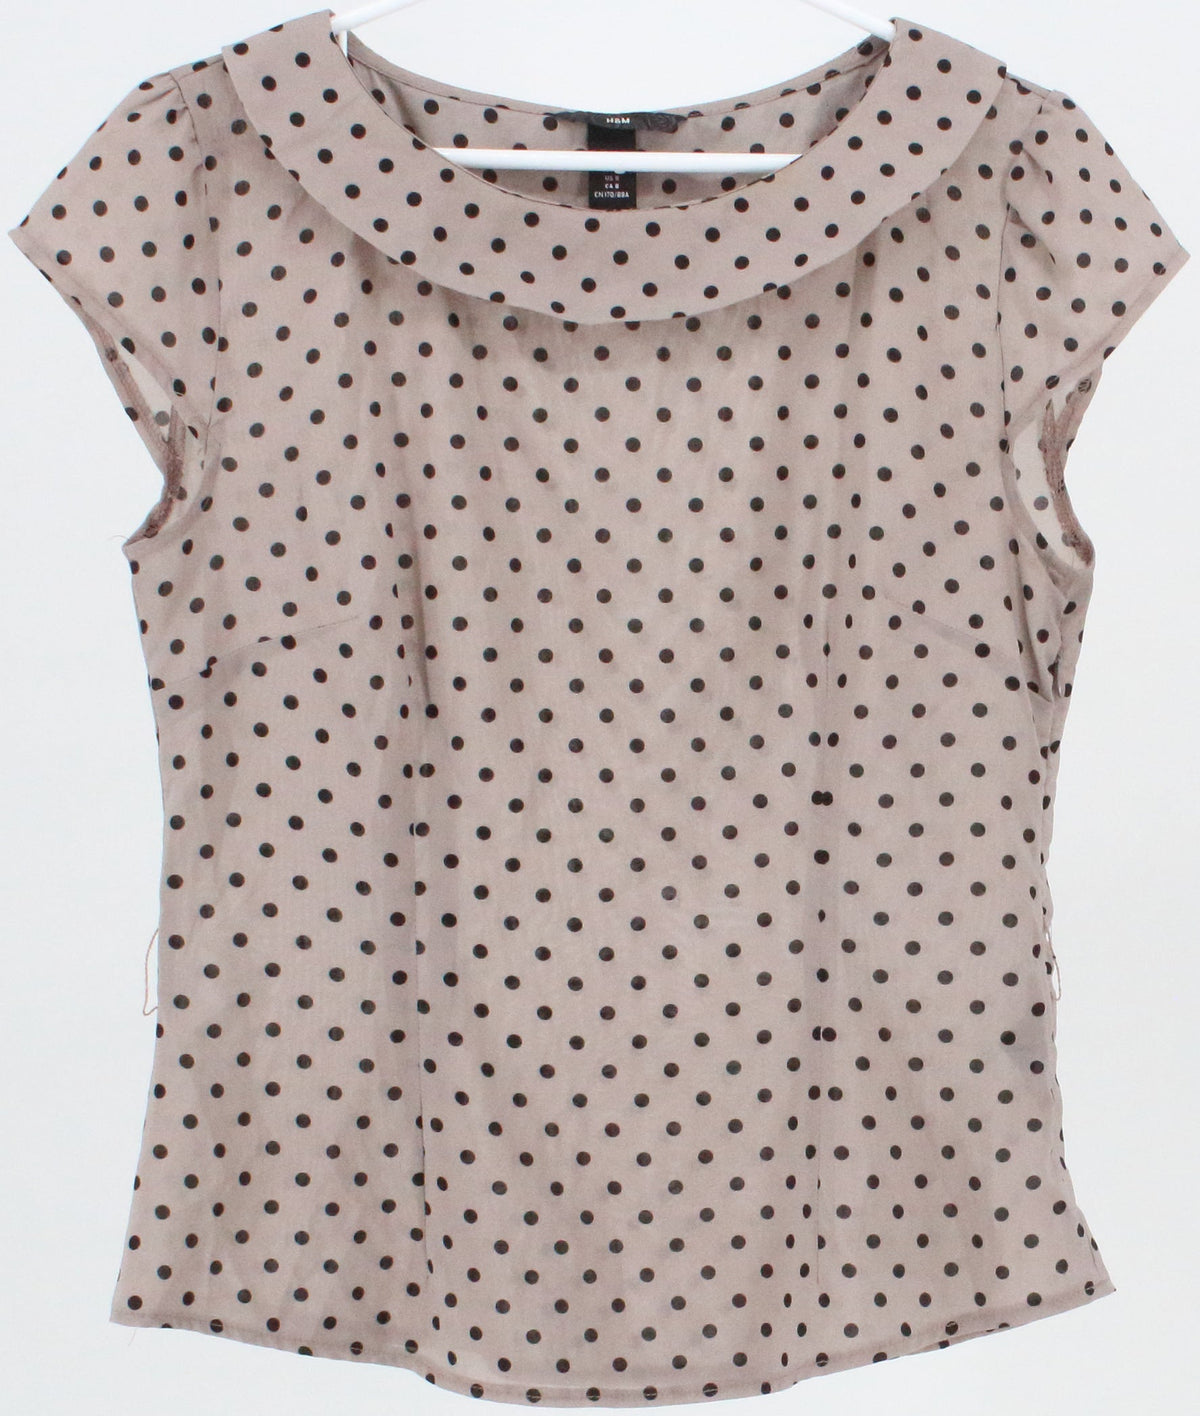 H&M Grey and Black Dots Top